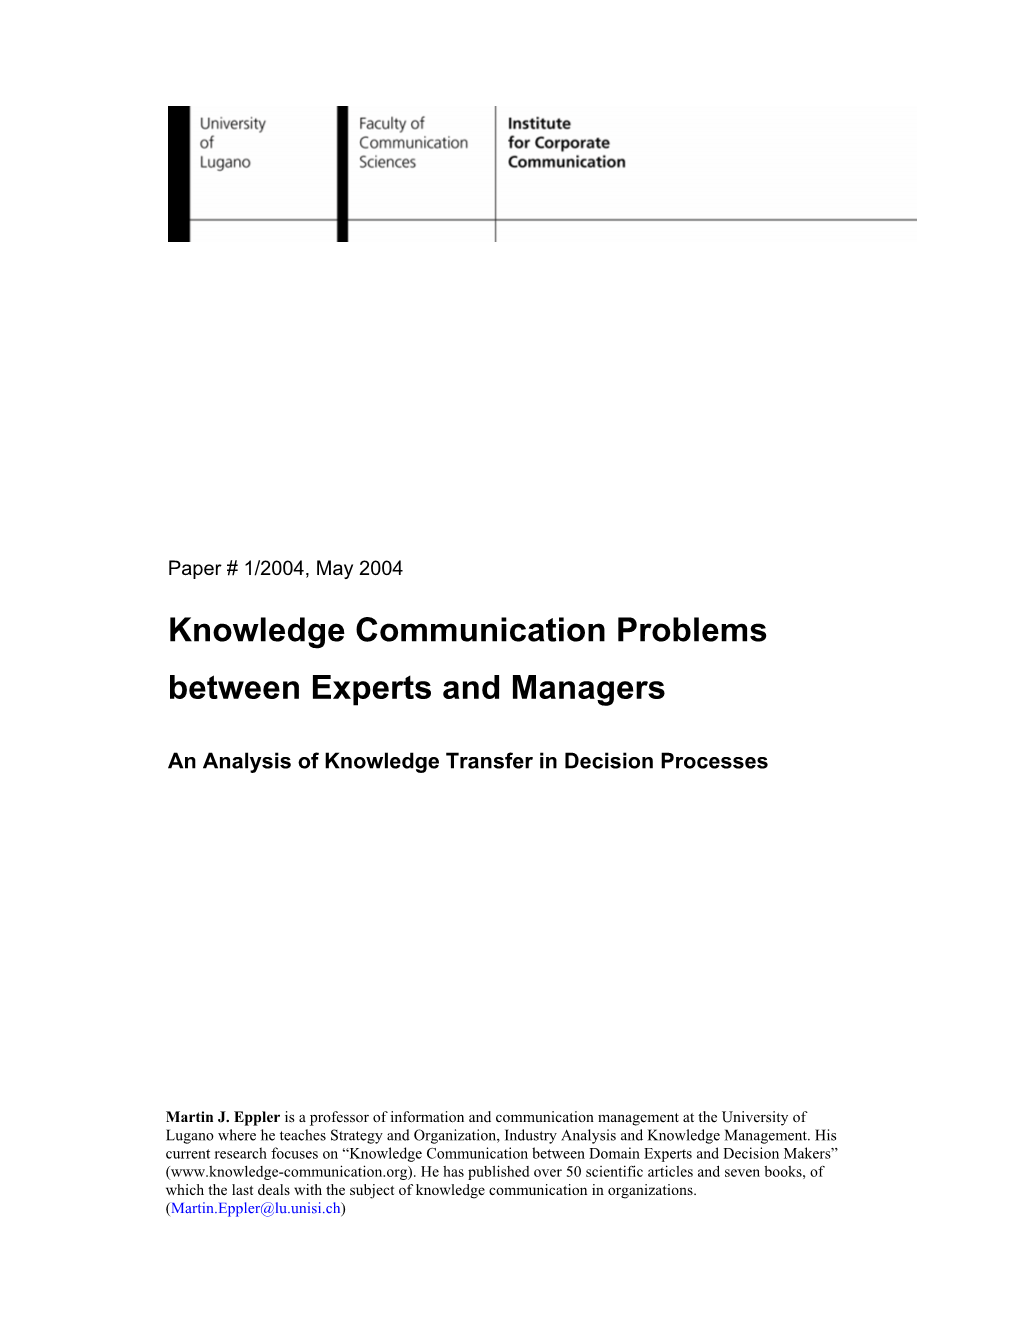 The Importance of Knowledge Communication in Management